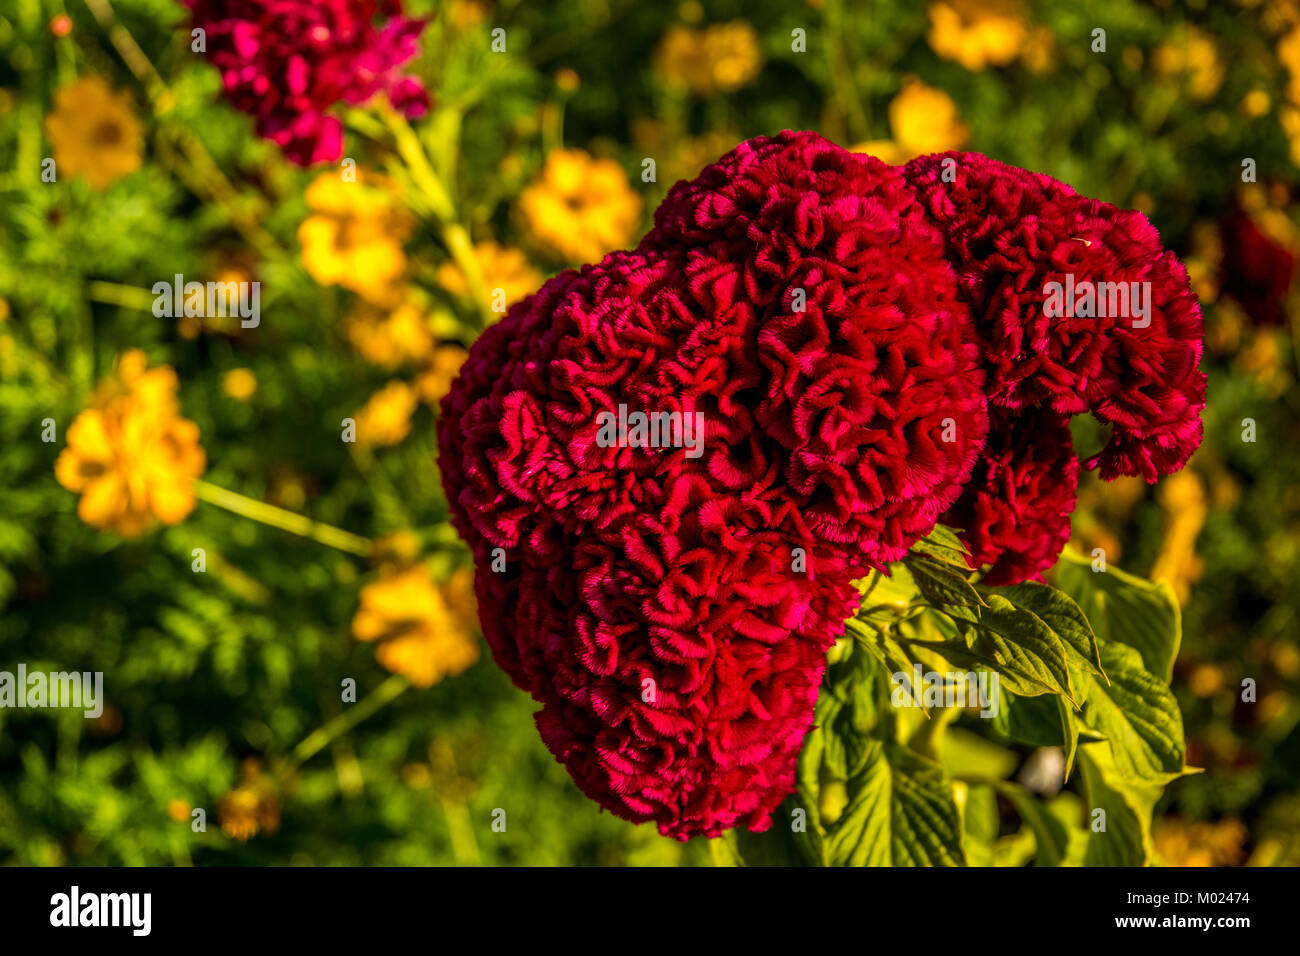 CORDOBA, ANDALUSIA / SPAIN - OCTOBER 14 2017: RED FLOWER Stock Photo